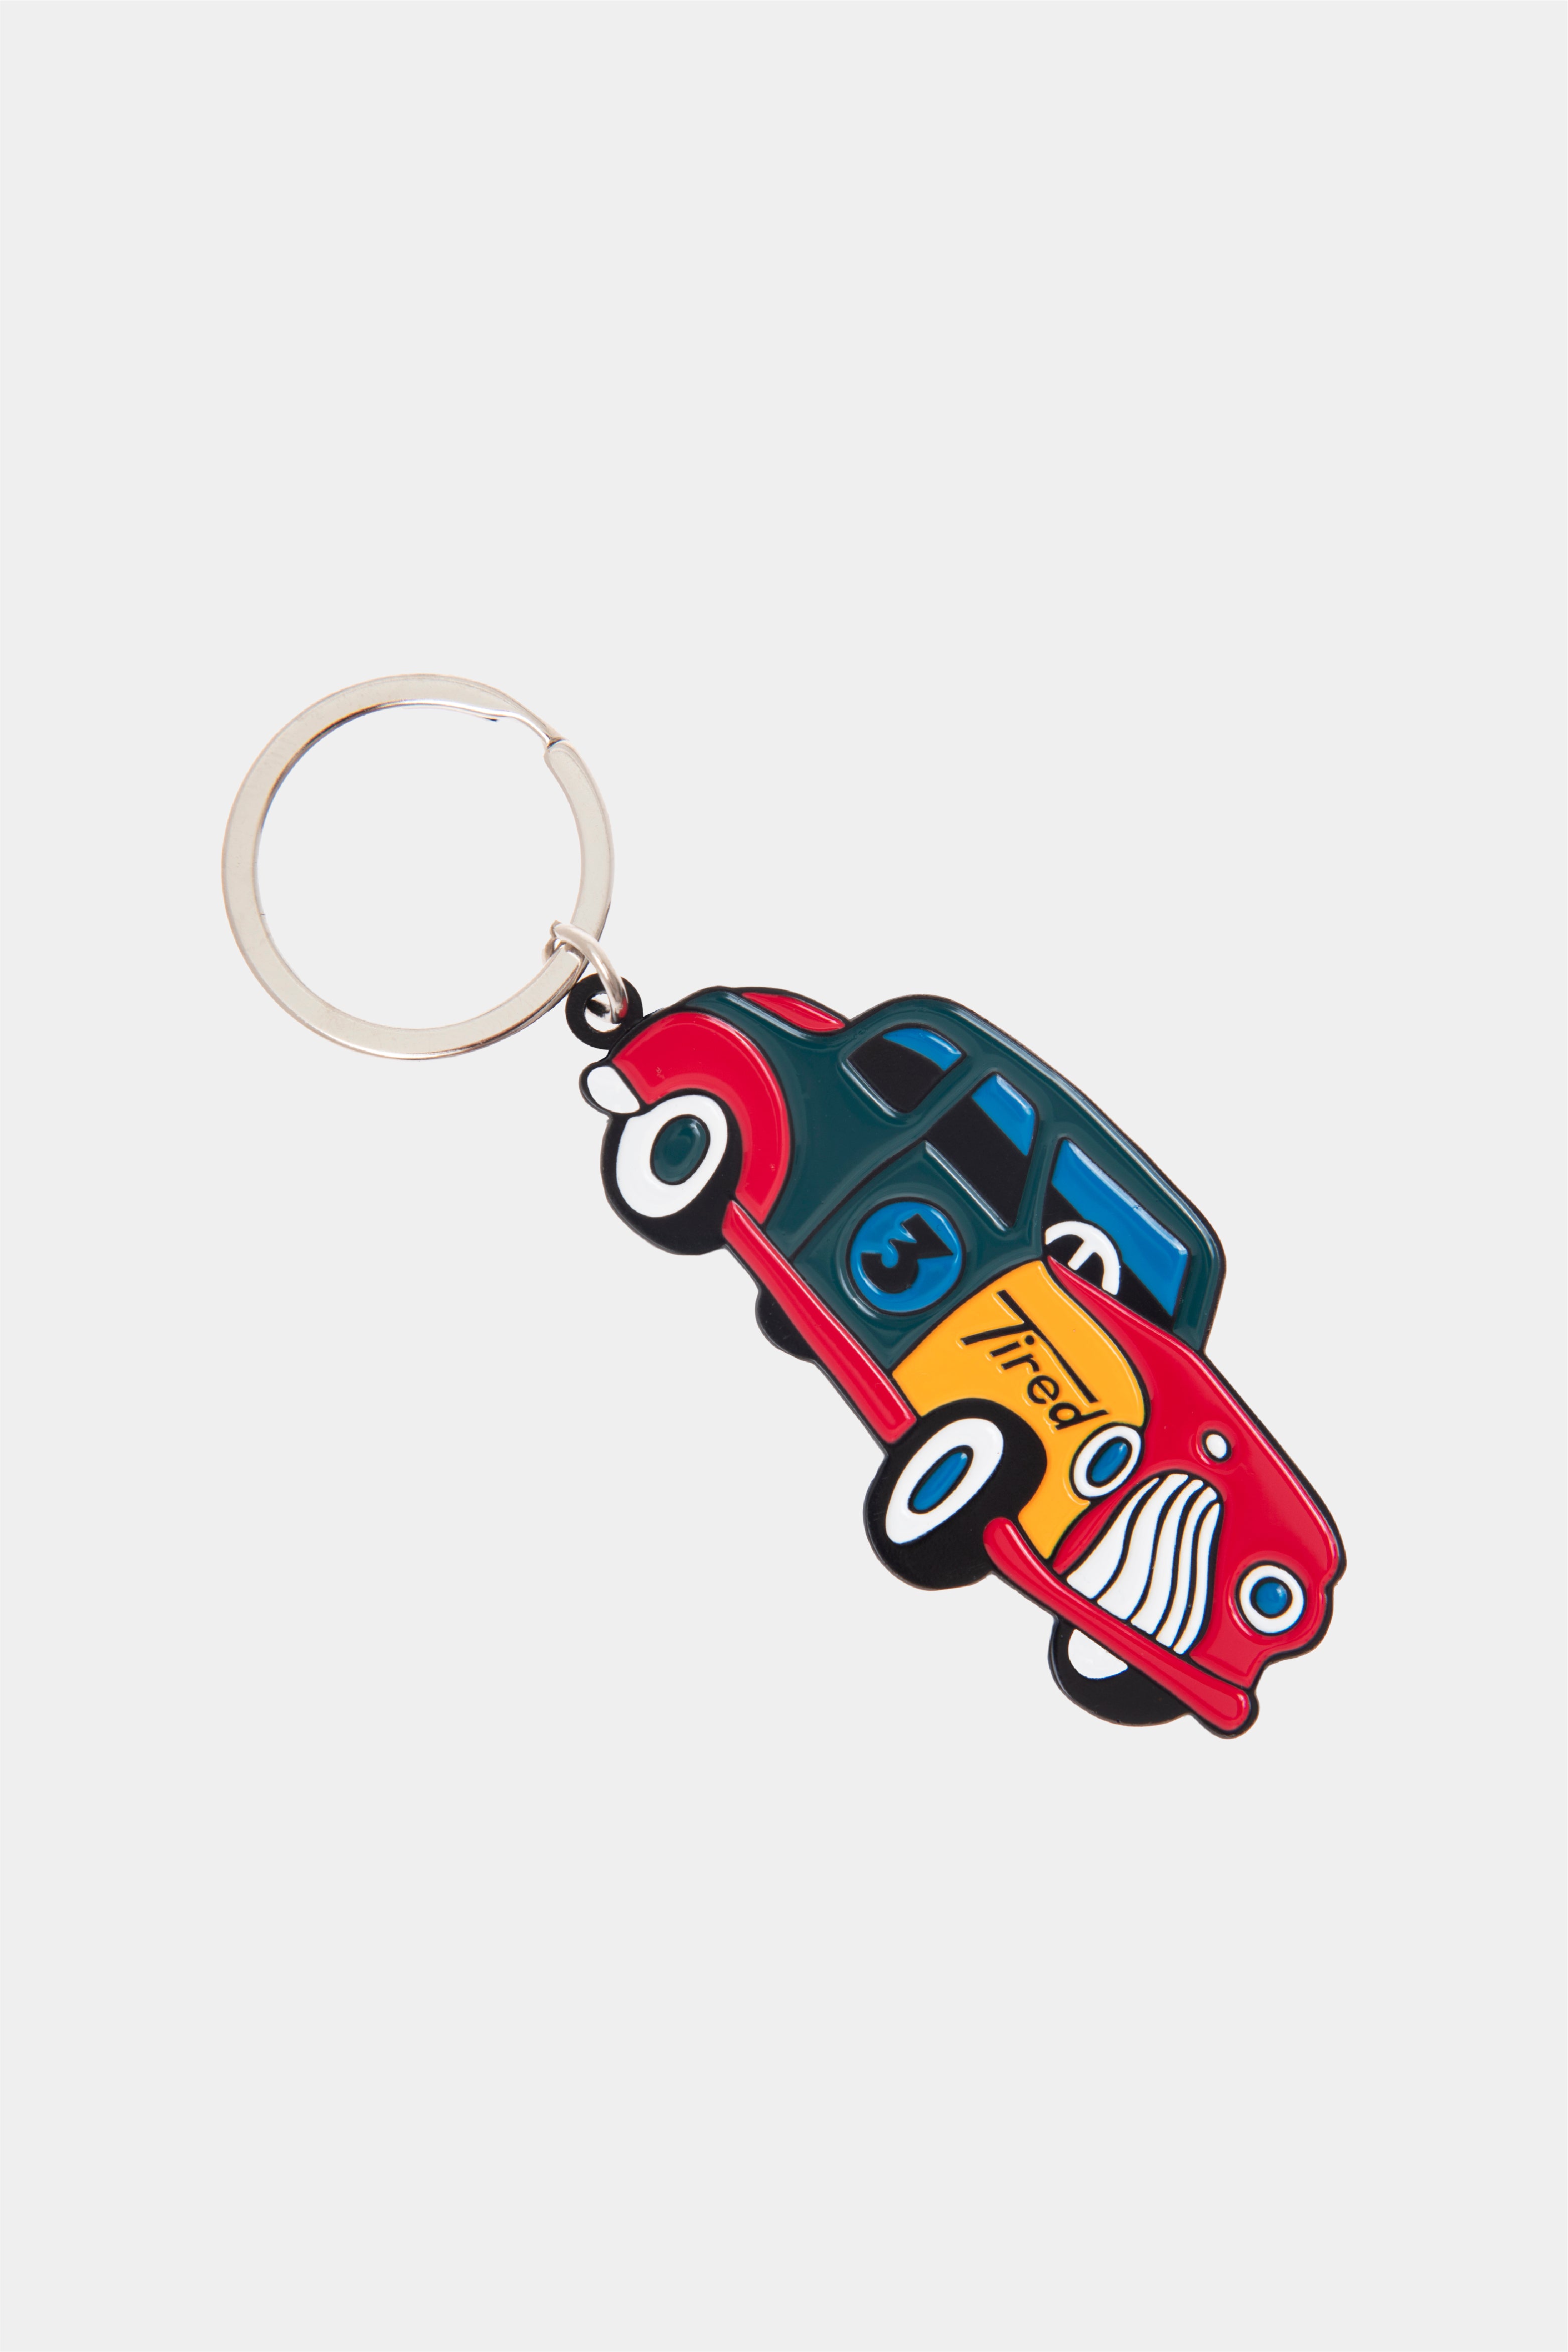 Selectshop FRAME - TIRED Old Mobil Keychain All-Accessories Concept Store Dubai